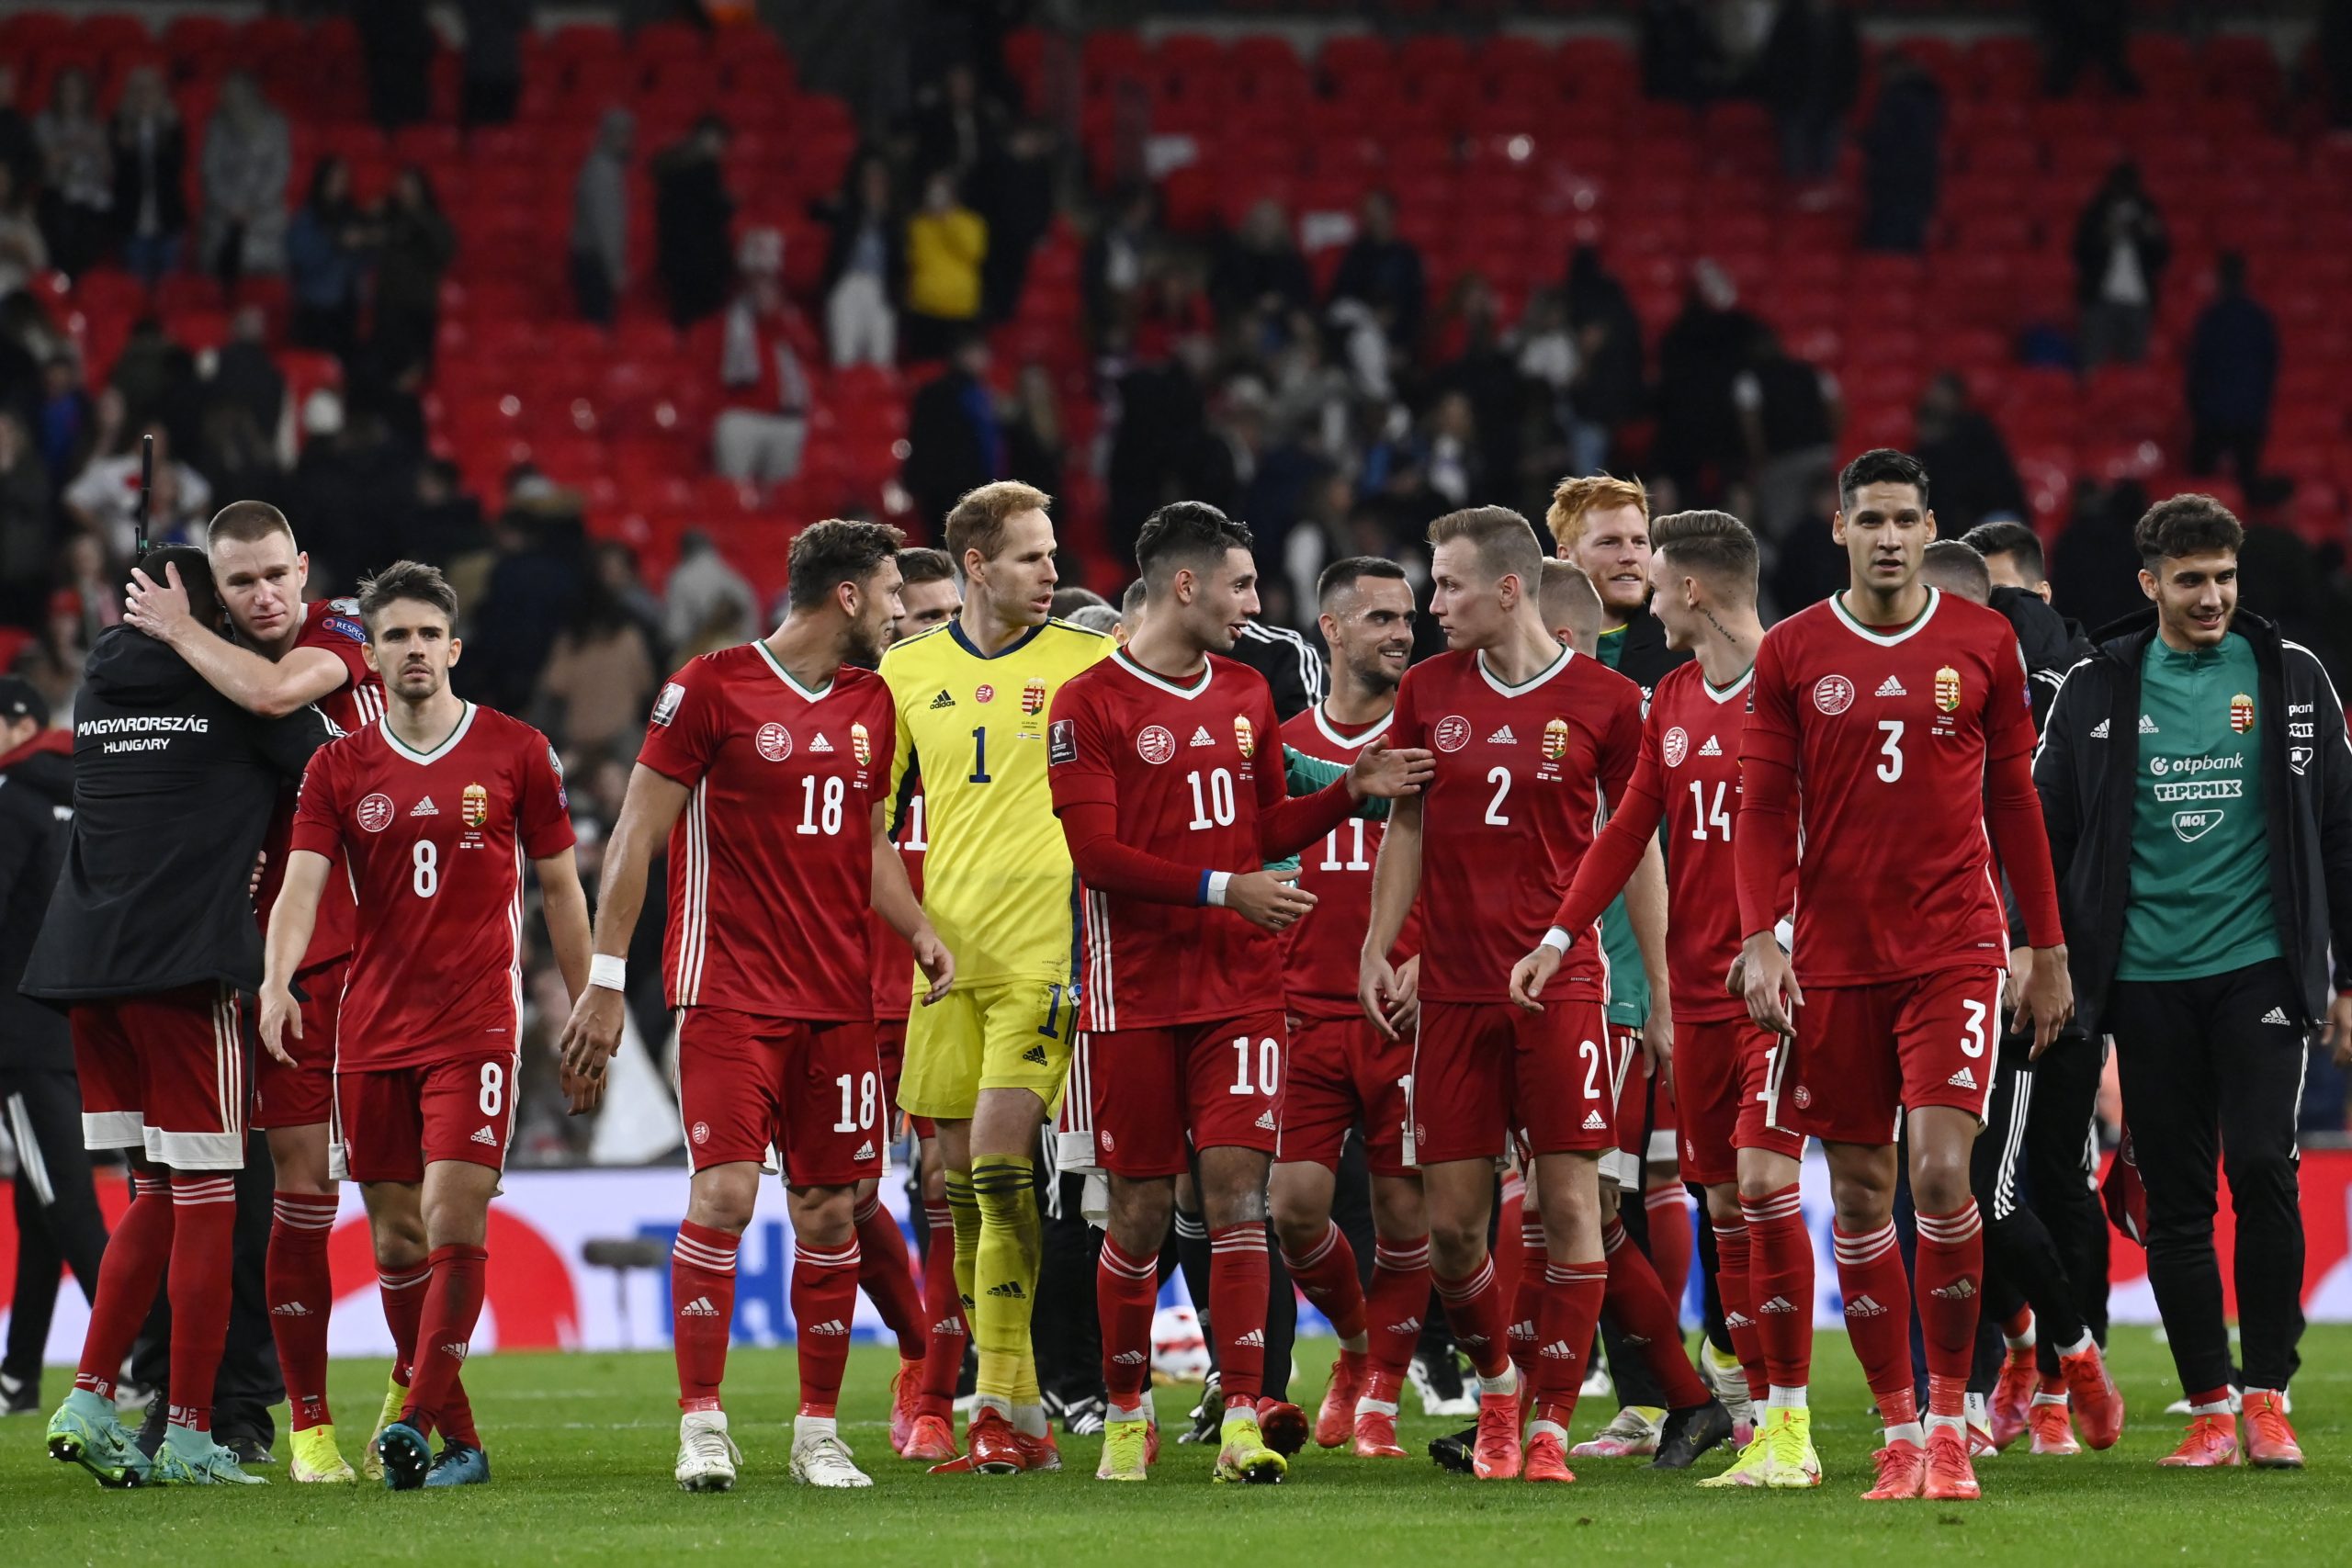 After Sobering Defeats, Hungary Claims Draw in England Against All Odds